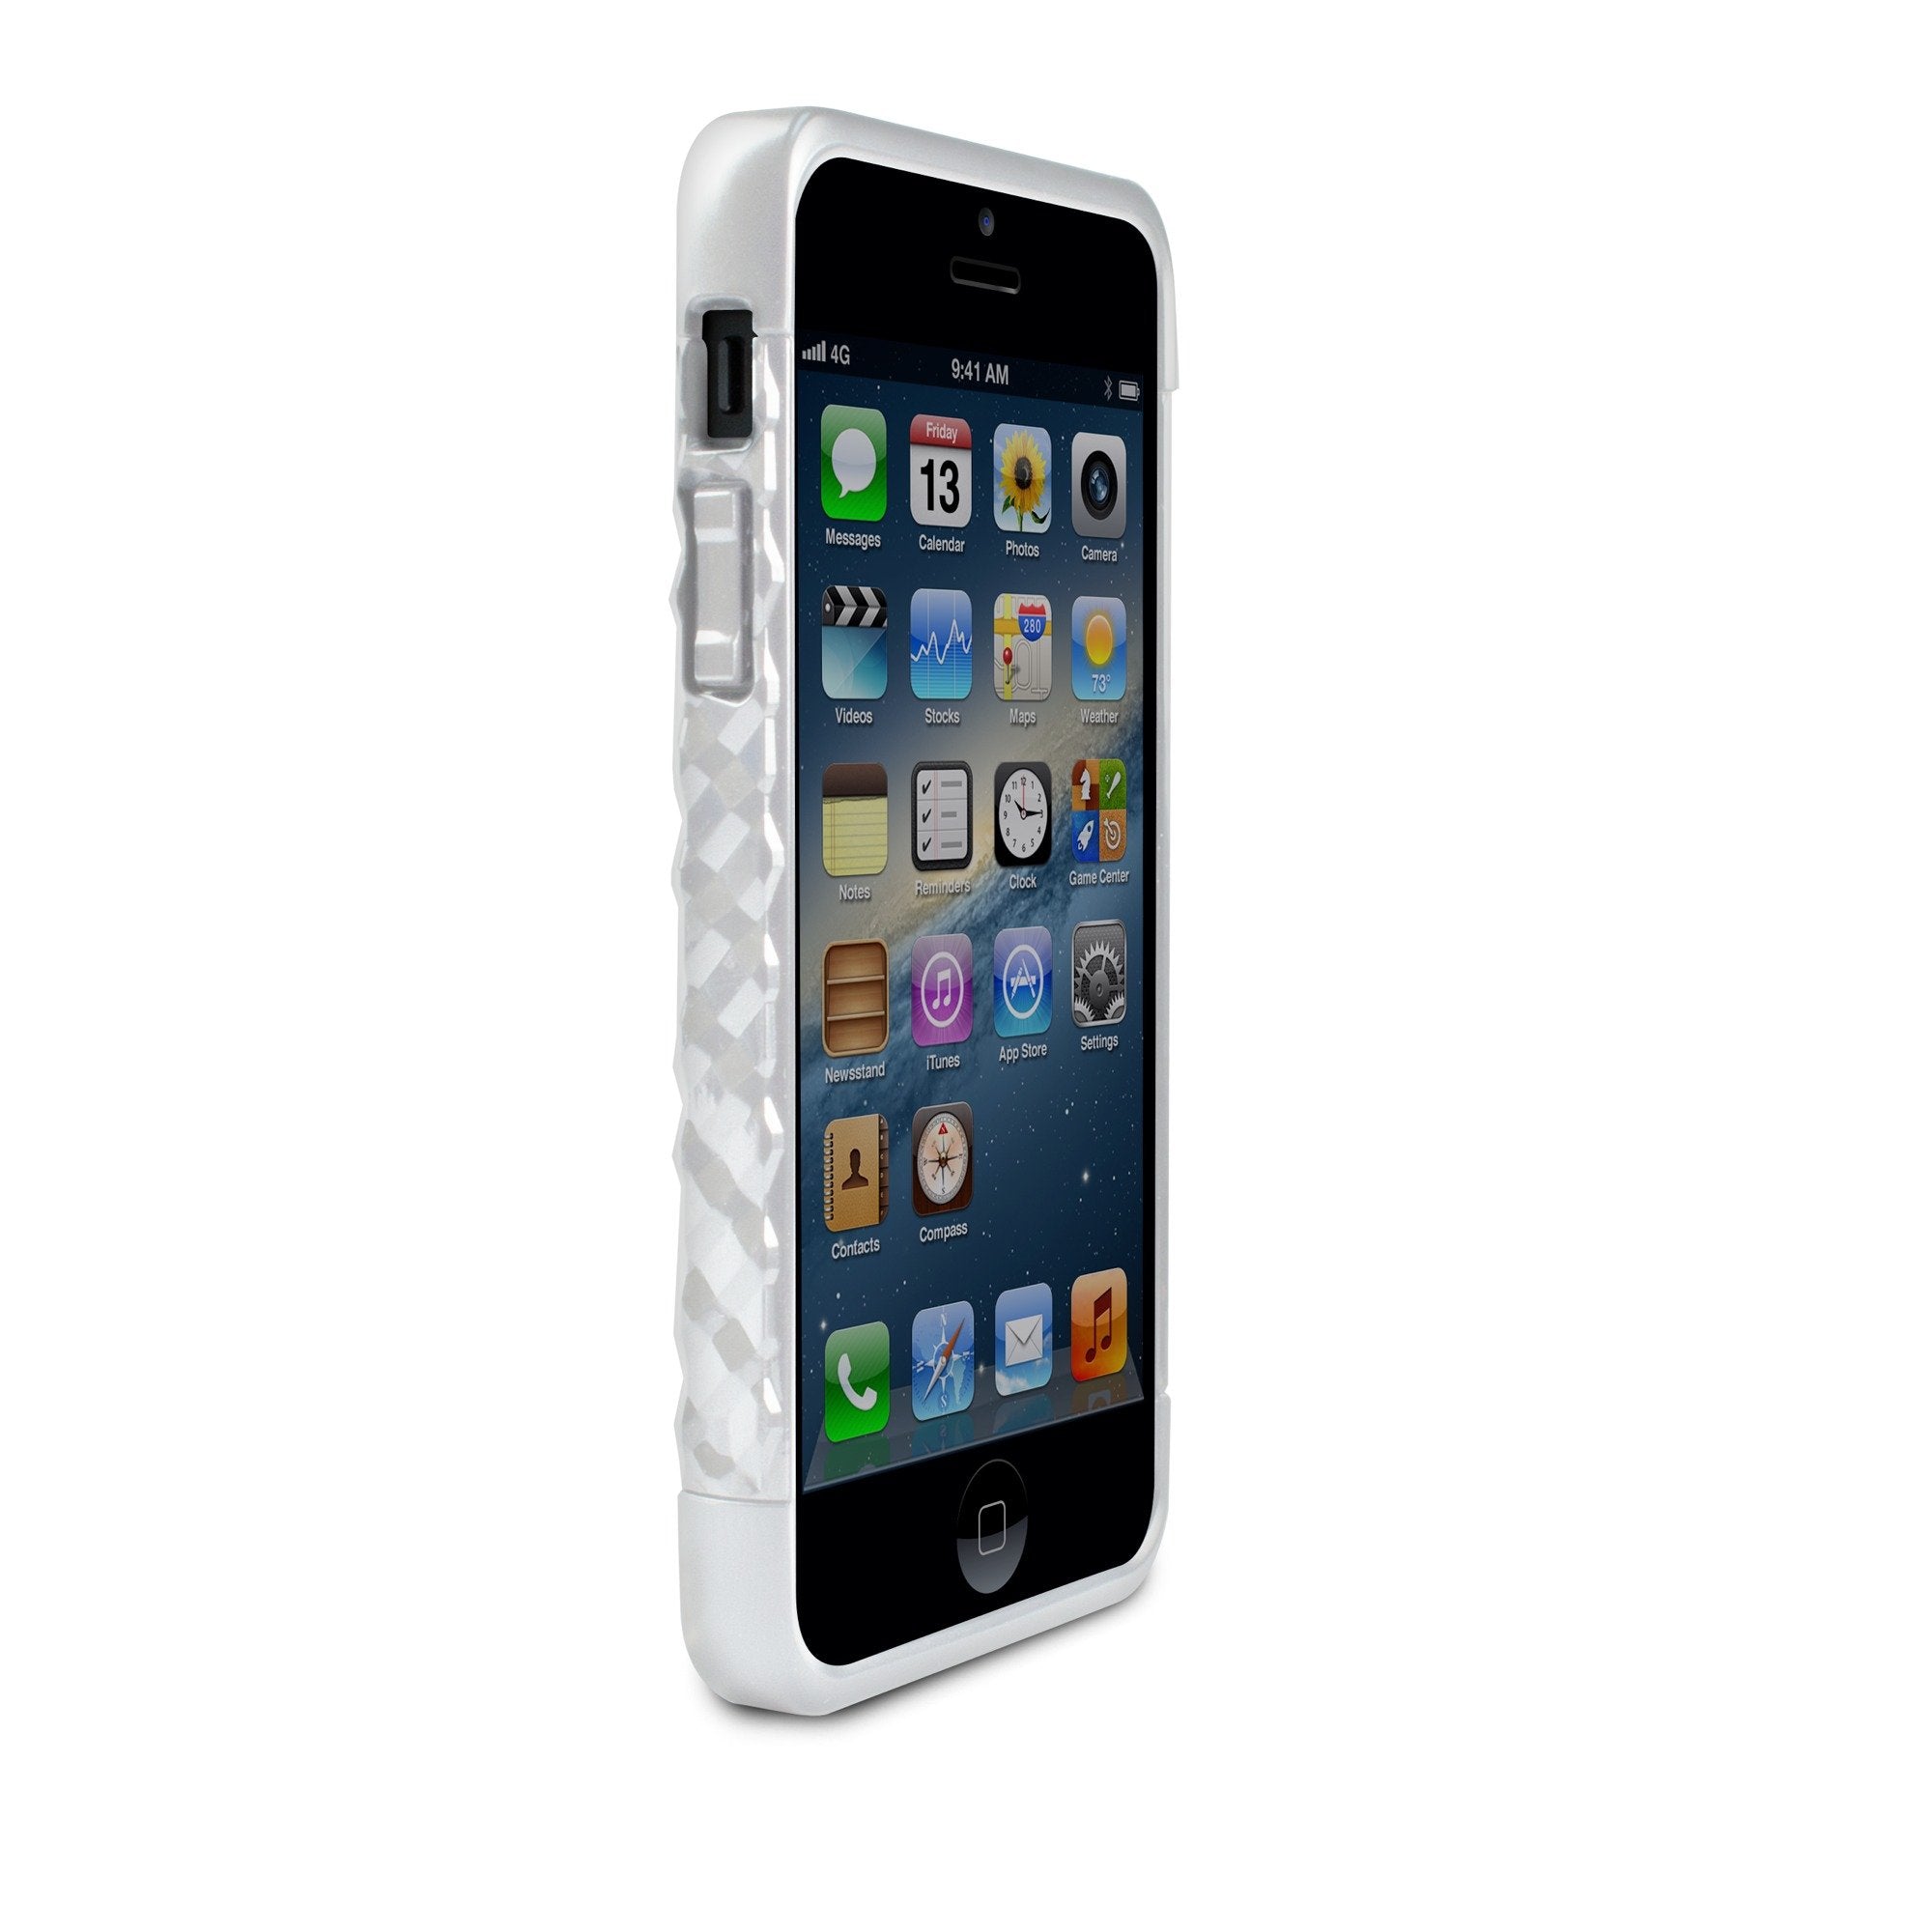 Marware ADRE1012 rEVOLUTION for iPhone 5 - 1 Pack - Retail Packaging - White